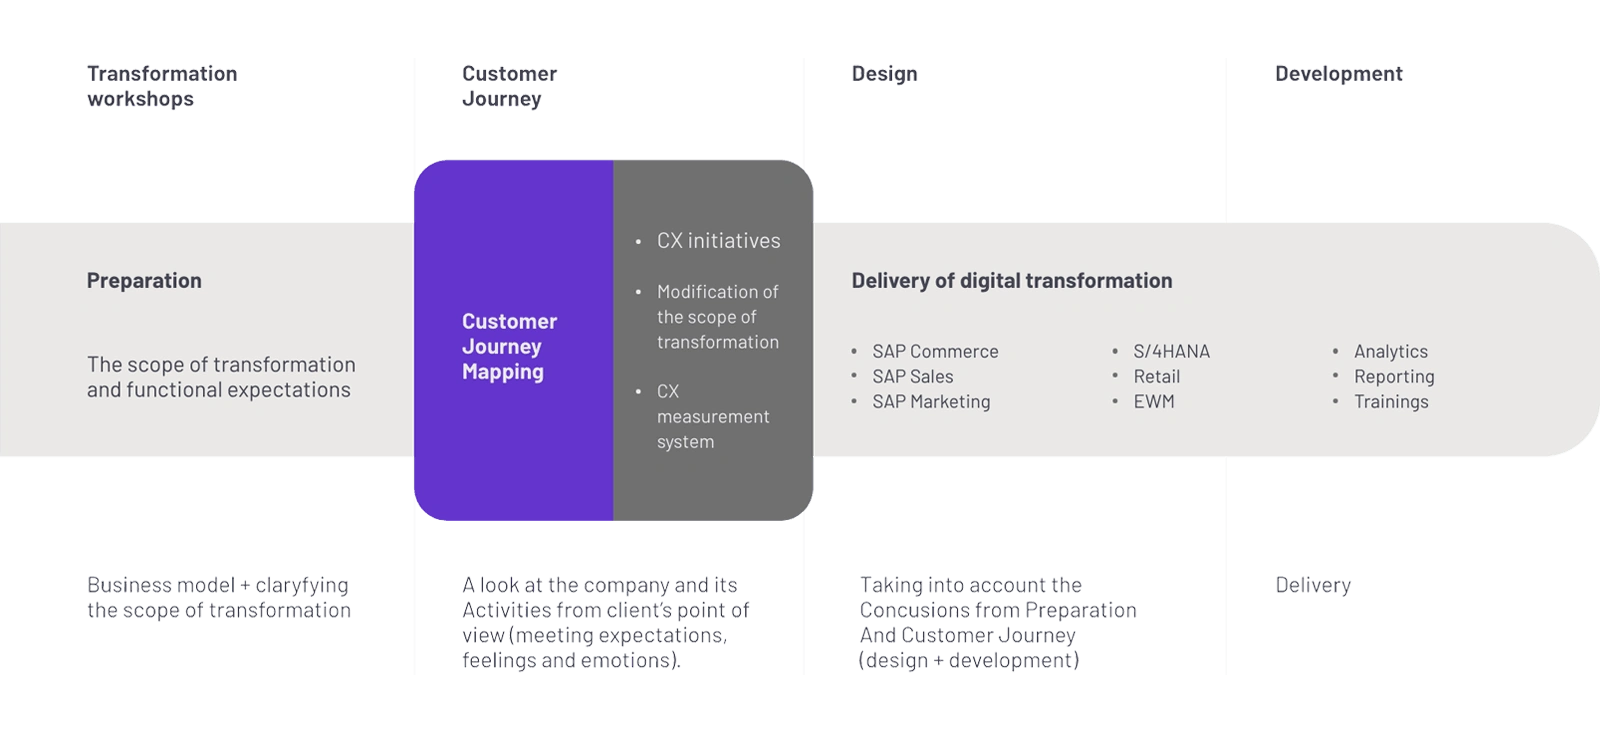 Customer Journey as an integral part of CX transformation